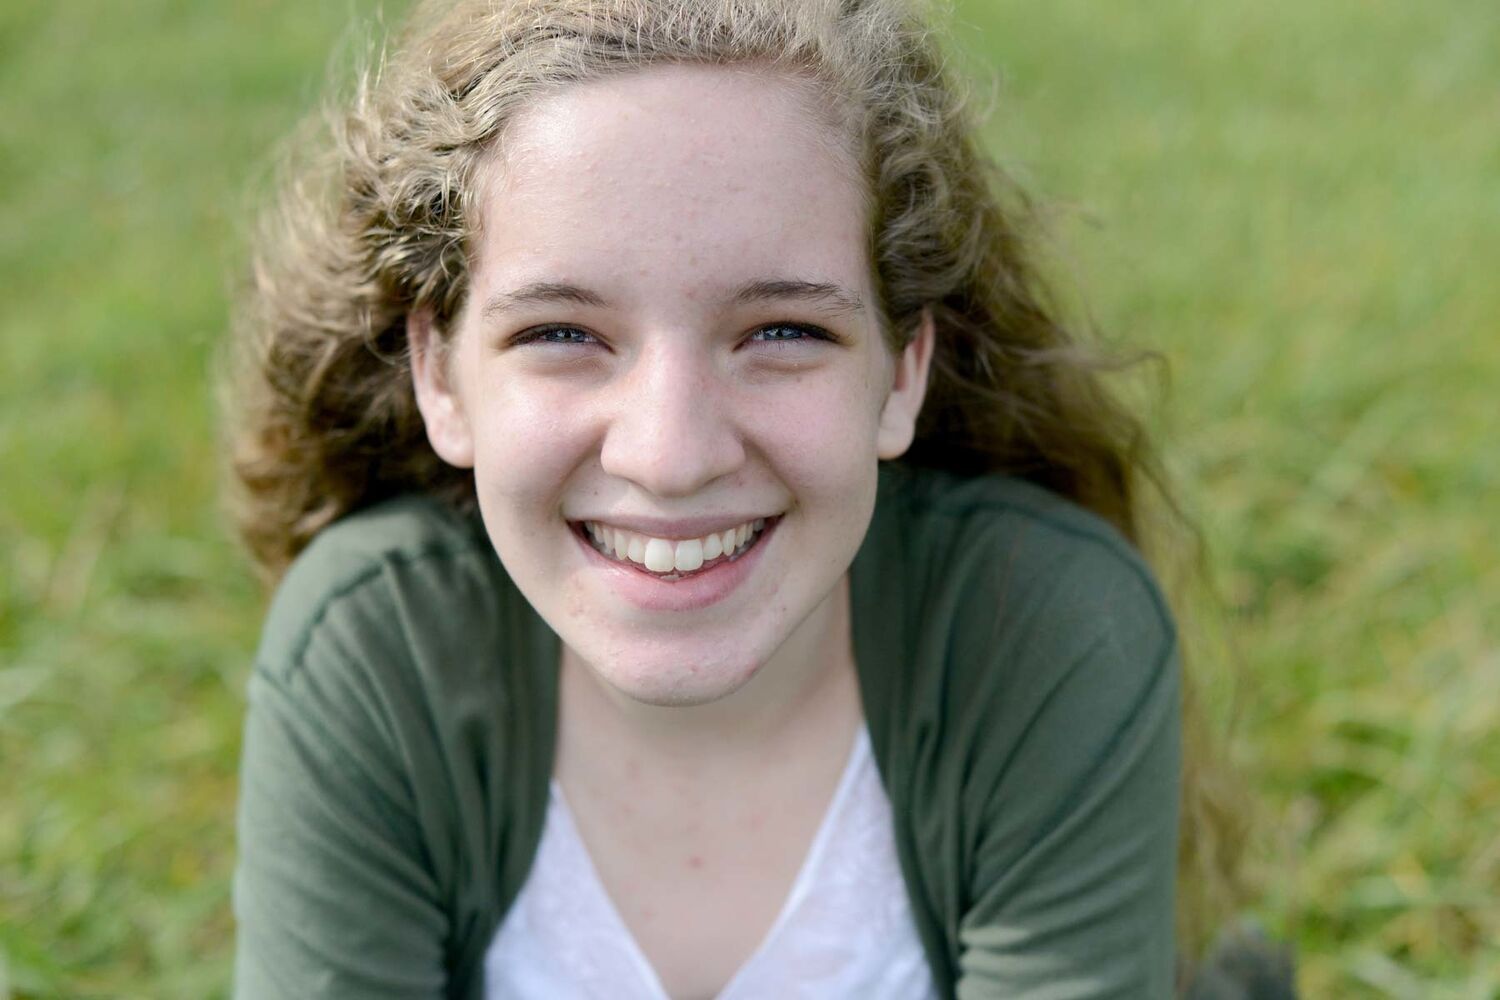 Teenage Girl Sitting On Grass Smiling With Wind Blowing Her Hair